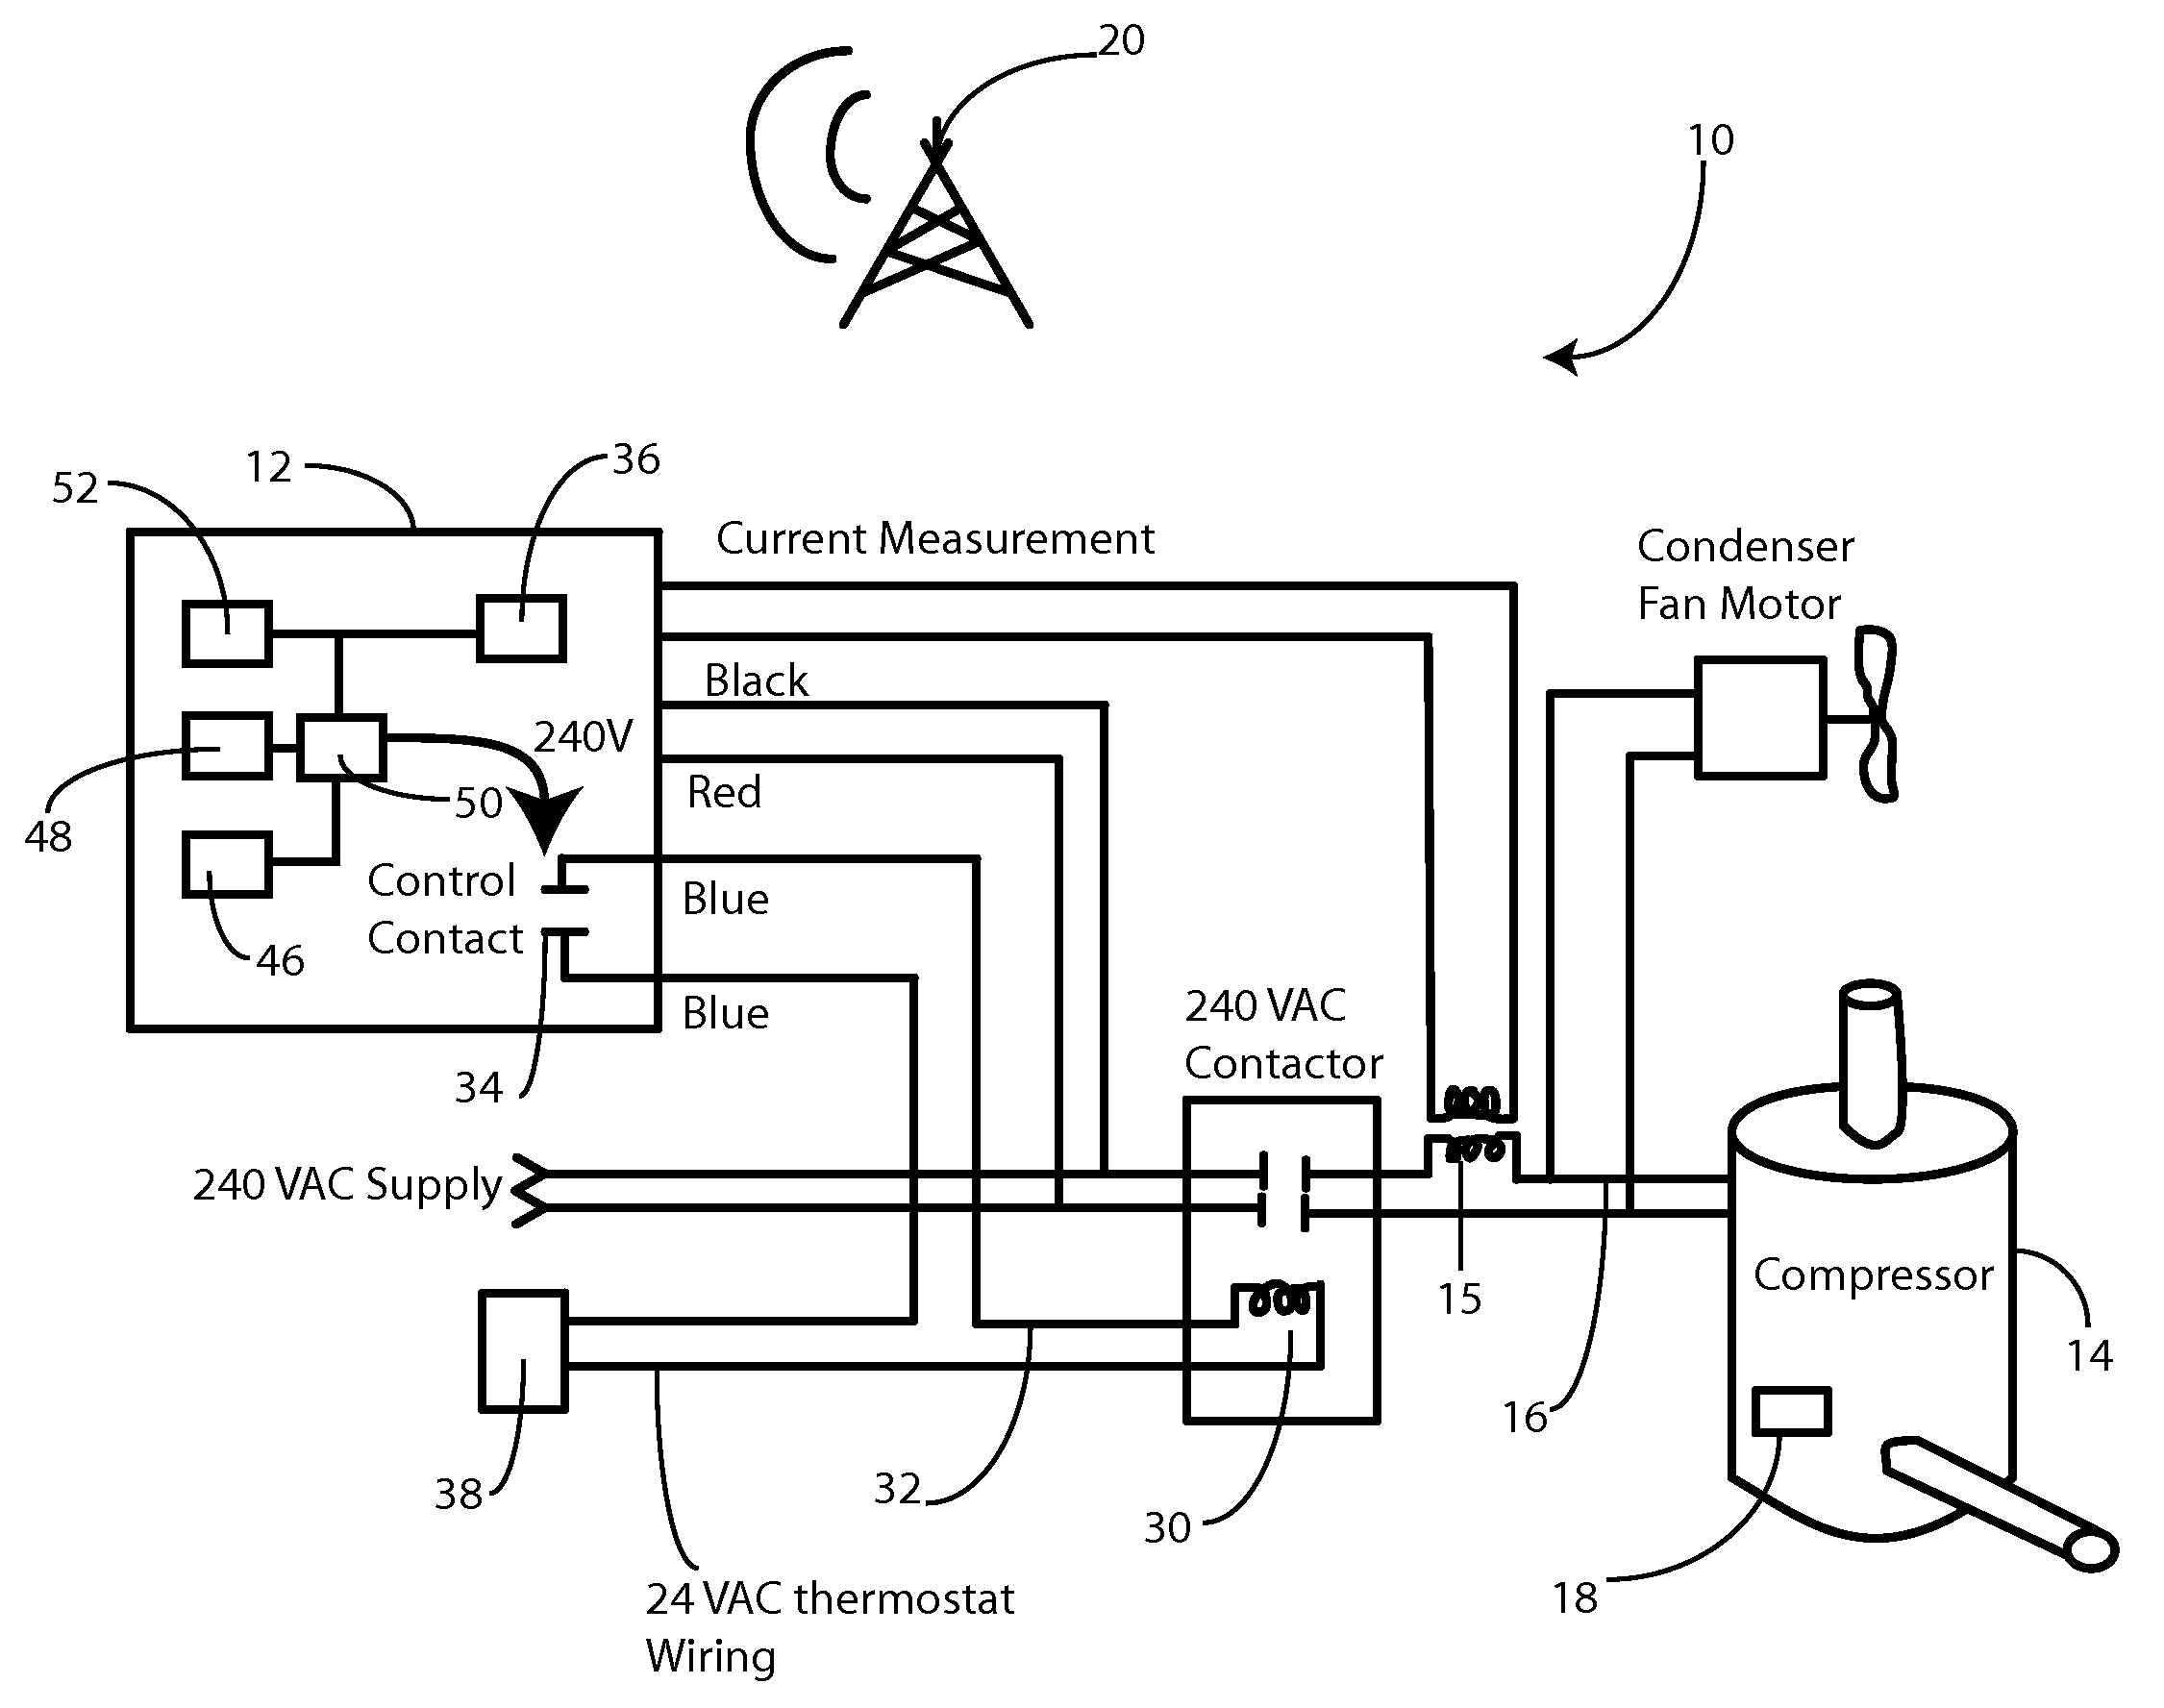 Local power consumption load control